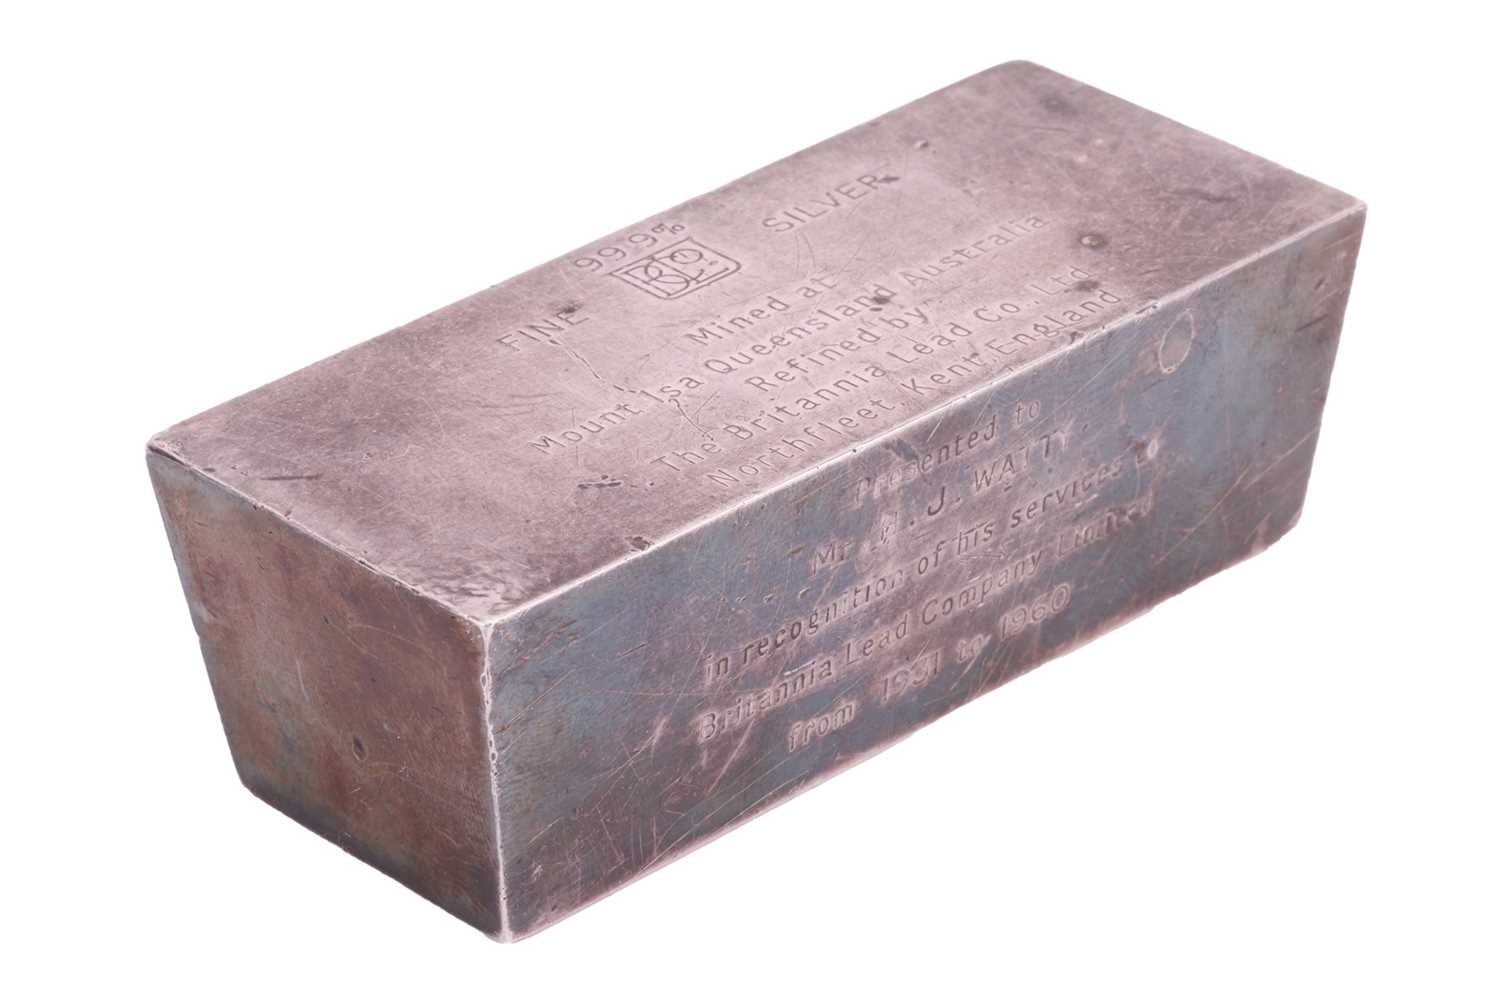 A white metal ingot stamped "99.9% fine silver", further elaborate with the inscription "Mined at Mo - Image 6 of 7